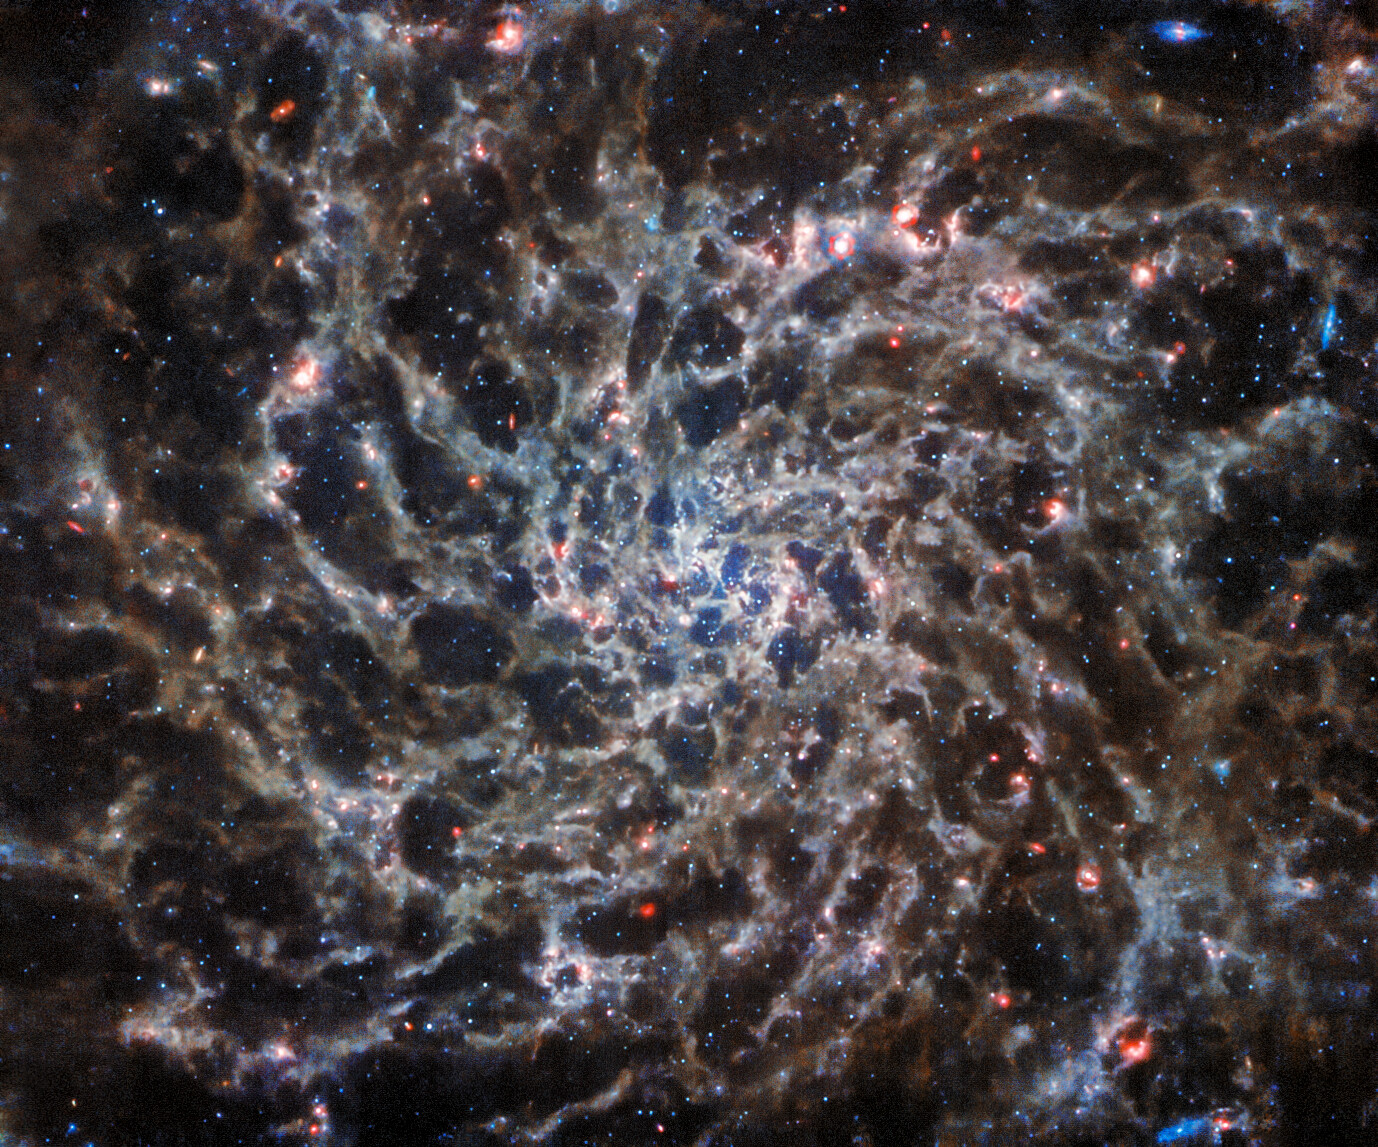 This image from the NASA/ESA/CSA James Webb Space Telescope shows IC 5332, a spiral galaxy, in unprecedented detail thanks to observations from the Mid-InfraRed Instrument (MIRI). Its symmetrical spiral arms, which appear so clearly in Hubble’s ultraviolet and visible-light image of IC 5332, are revealed as a complex web of gas, emitting infrared light at a variety of temperatures. Capturing light at these wavelengths requires very specialised instruments kept at very cold temperatures, and MIRI performs spectacularly at the task. Image: ESA/Webb, NASA & CSA, J. Lee and the PHANGS-JWST and PHANGS-HST Teams